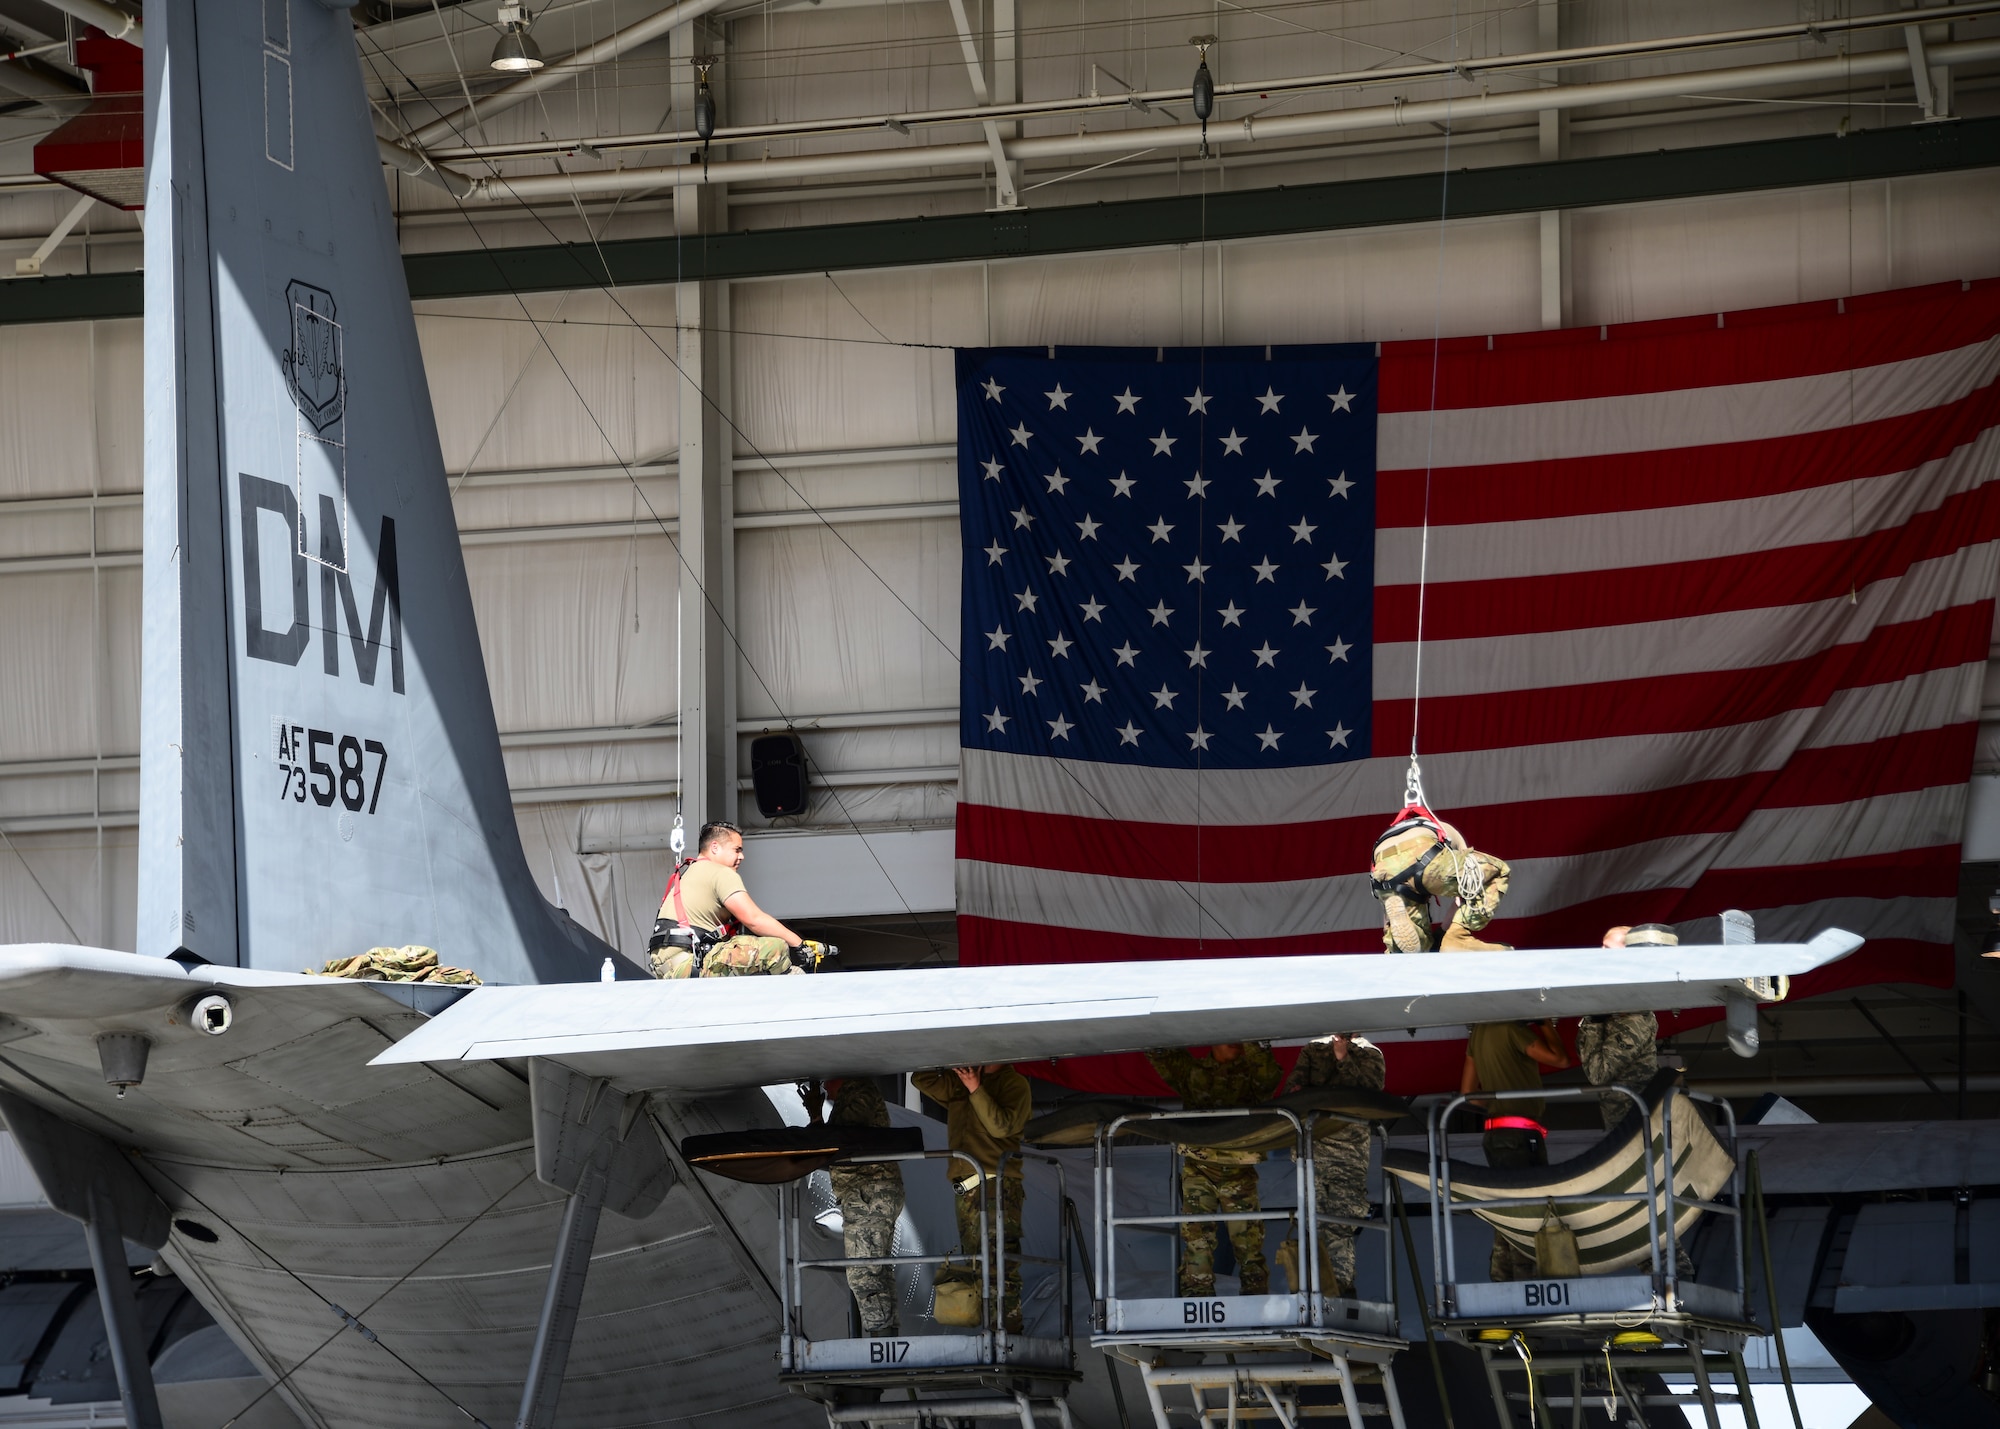 Maintainers work on aircraft